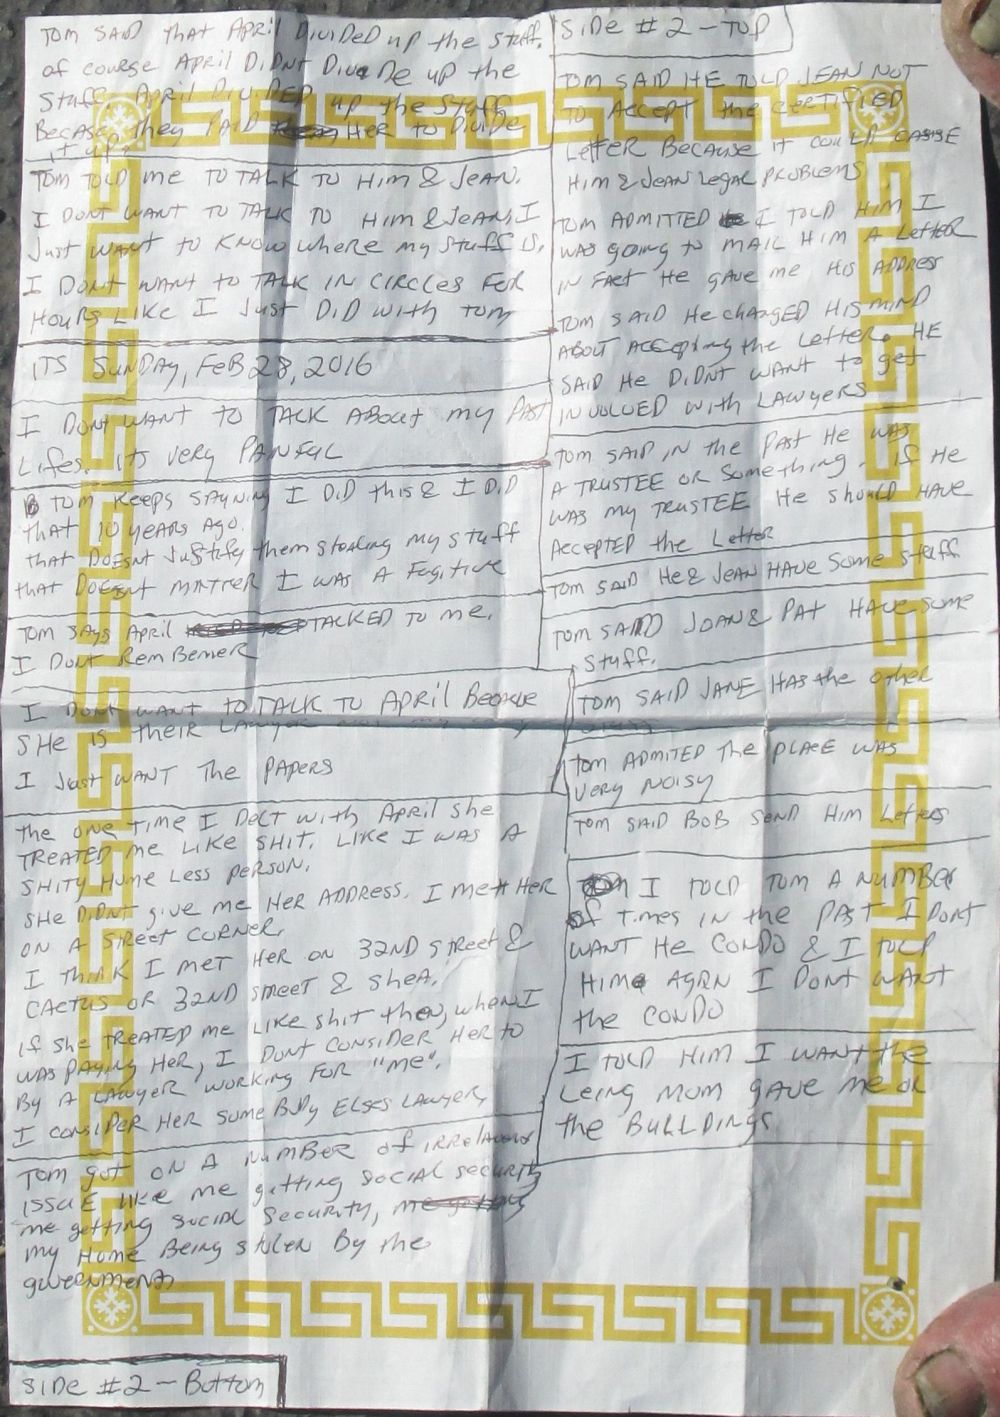 Sunday, Feburary 28, 2016 - Tom DiRoss's reply to the postcard - He came by McDonalds and these are my notes - Tom Diross, Tom Di Ross, Tom Deross, Tom De Ross  - Jean DiRoss, Jean DeRoss, Jean De Ross, Jean Di Ross